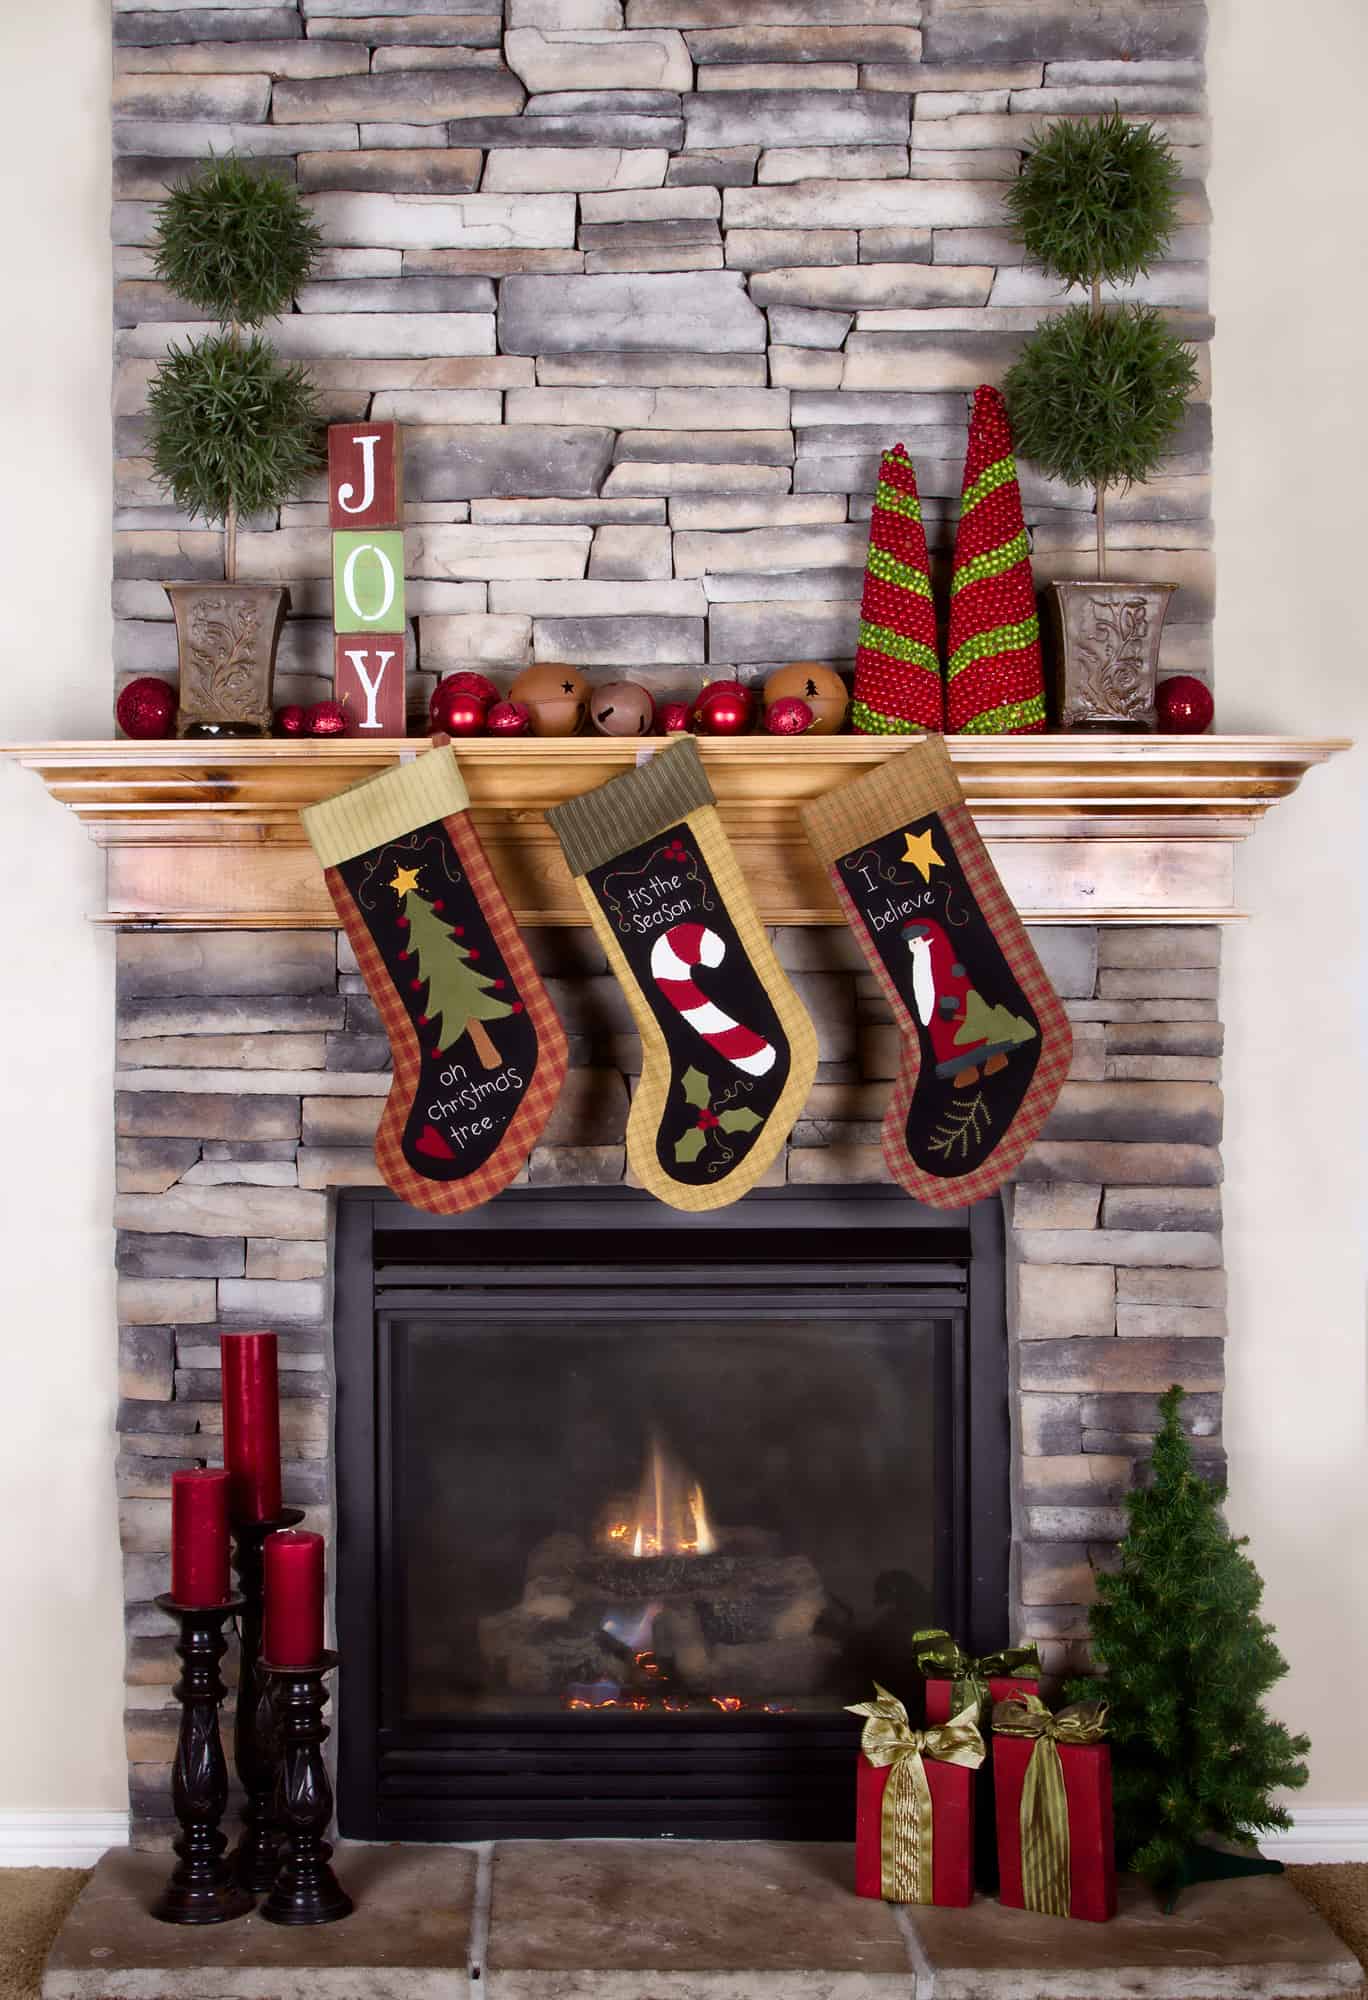 Adding a festive touch like stockings and decorations around a fireplace mantle is one of 9 hacks for how to prepare your home for holiday guests